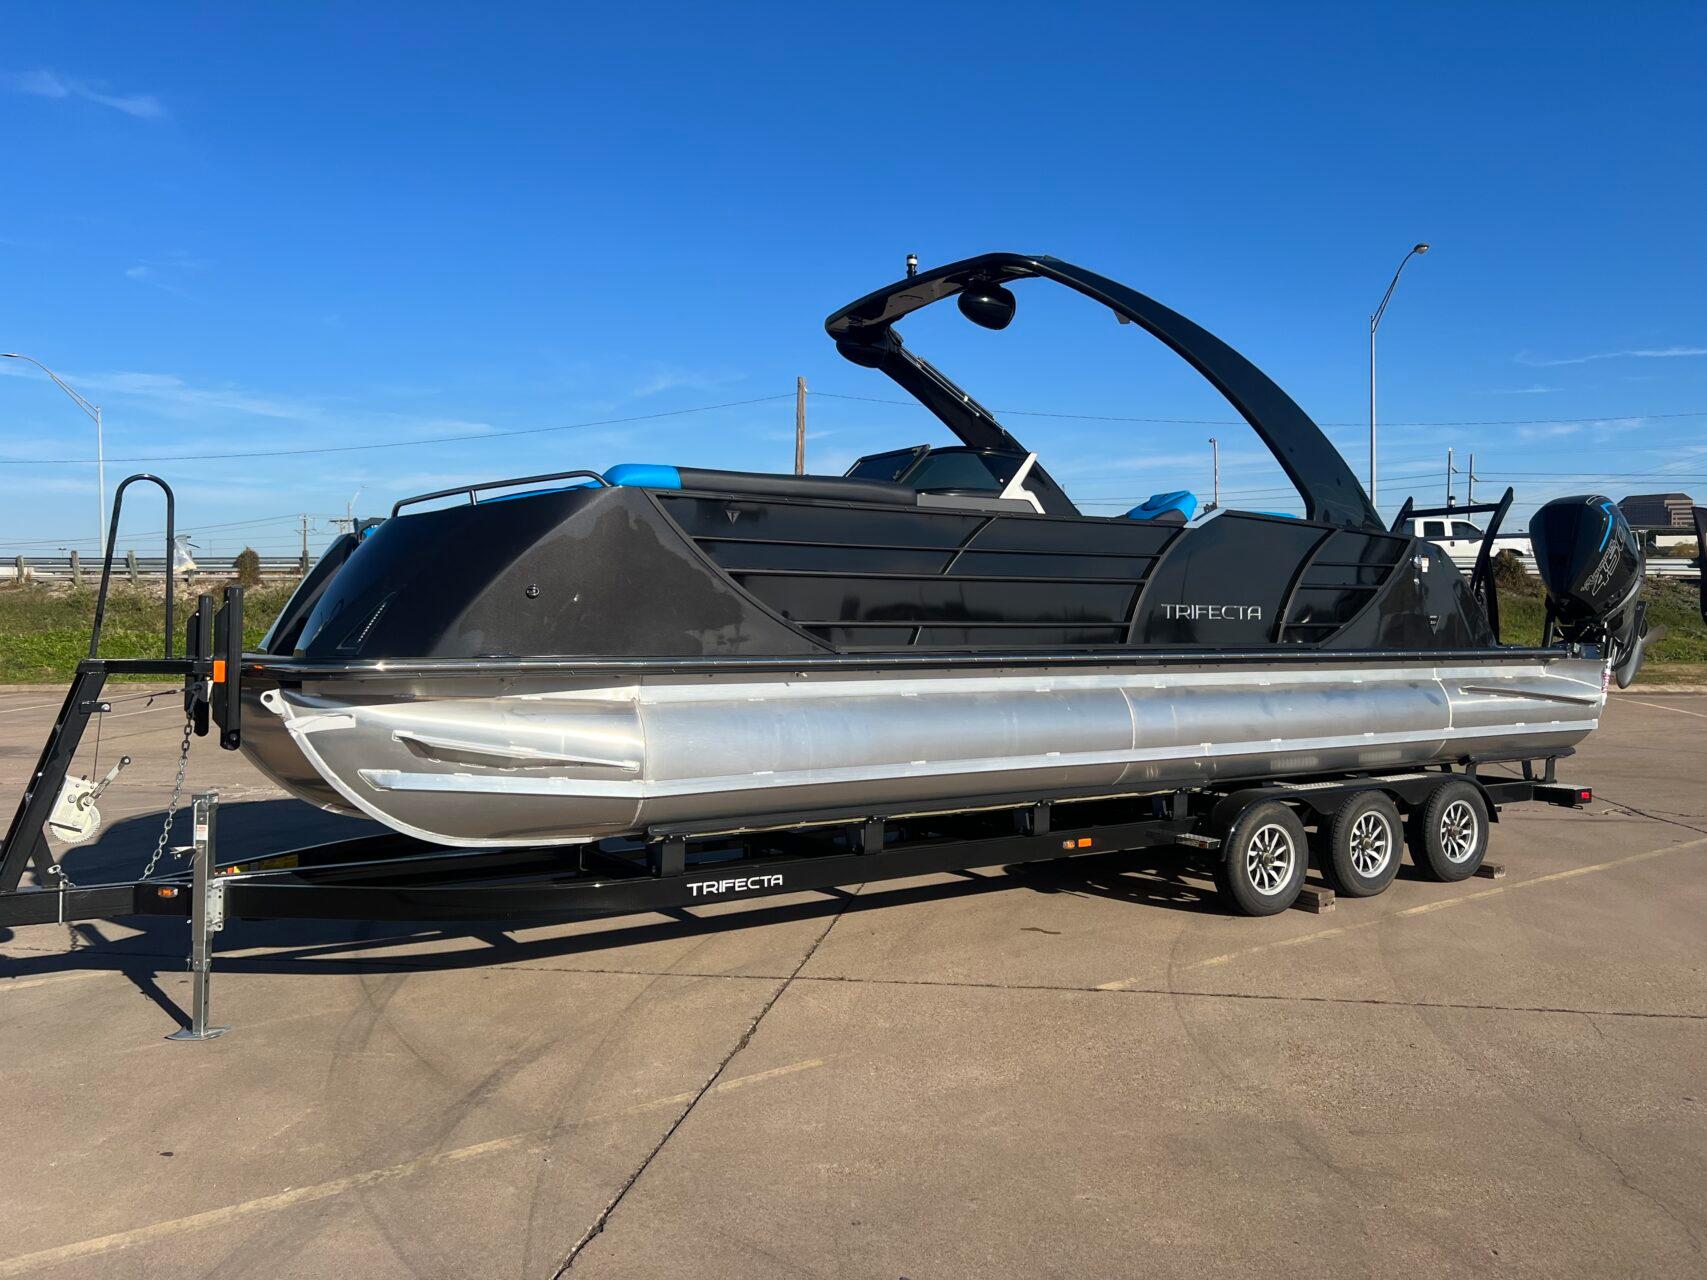 Page 27 of 120 - All New power boats for sale in Fort Worth, Texas - boats .com